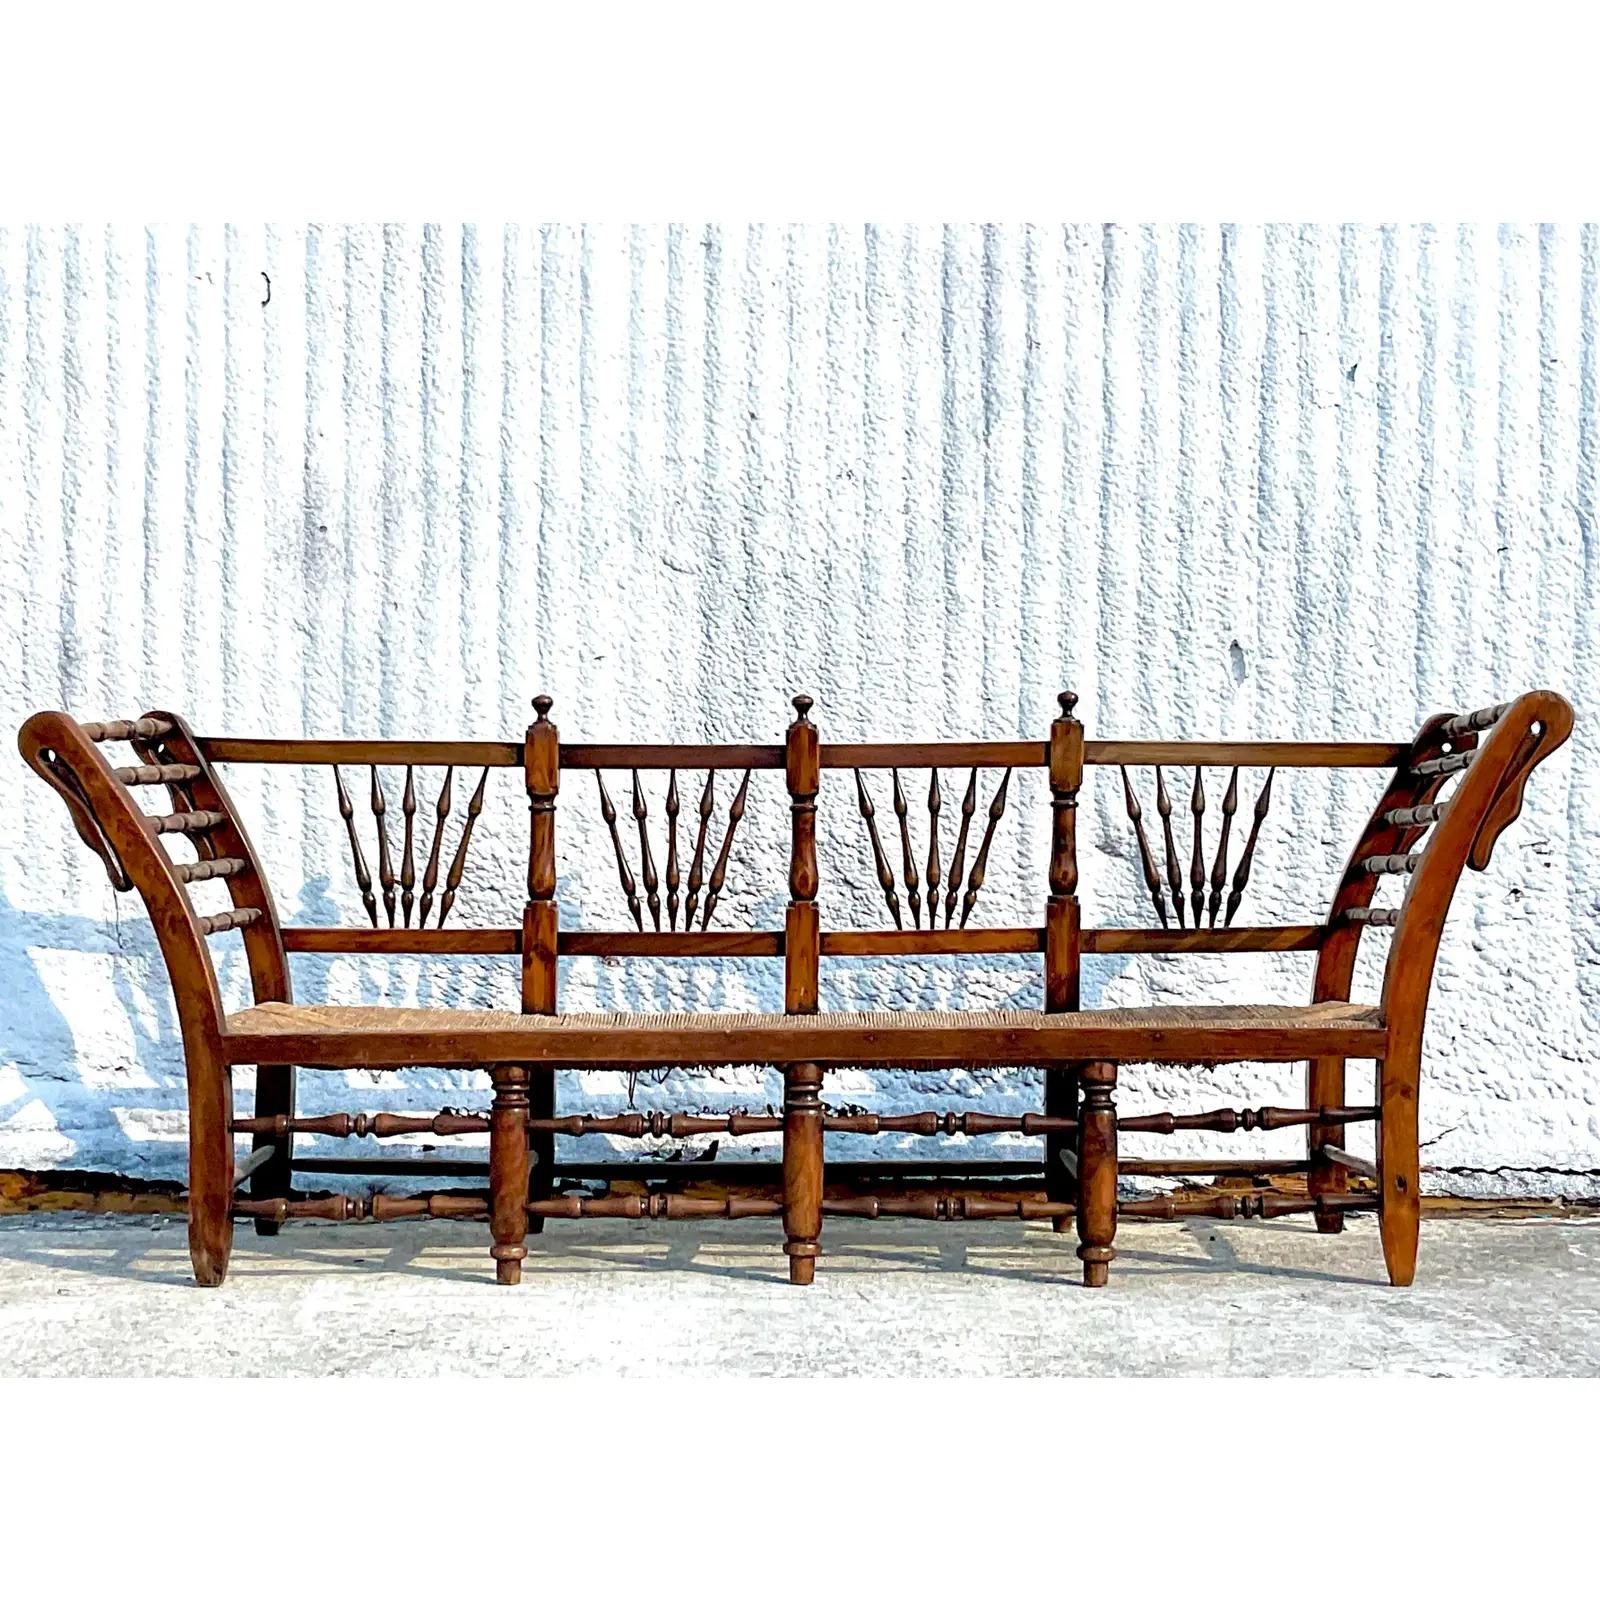 Vintage Rustic Rush Seat Bench For Sale 3